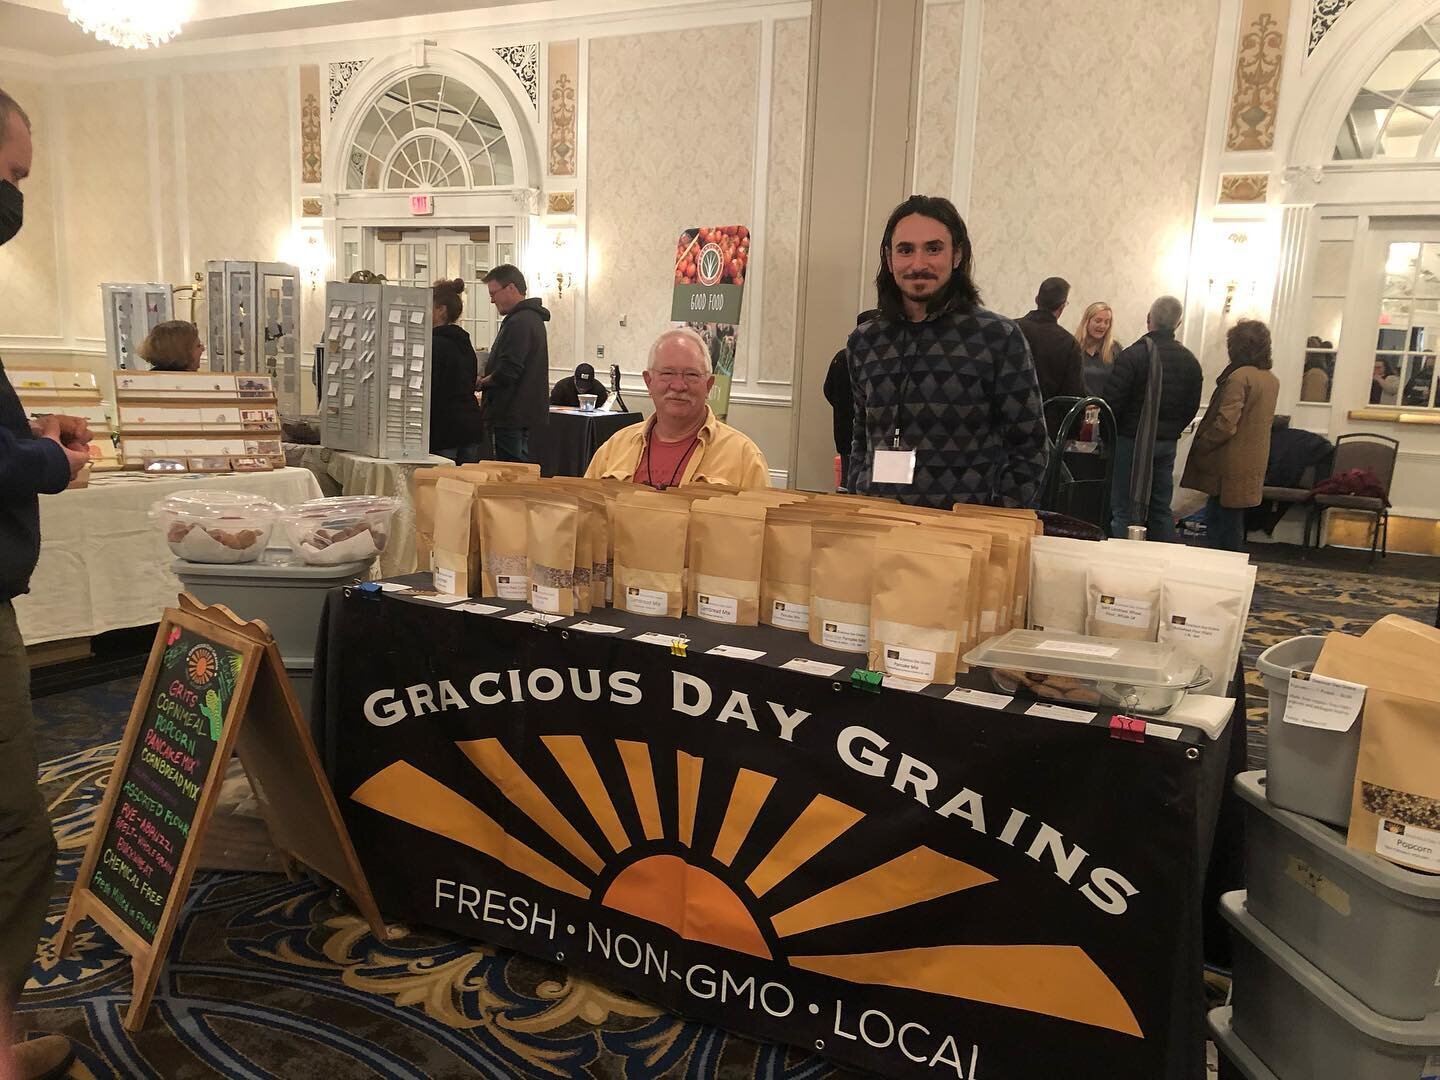 Come and see us today at the Virginia Biological Farming Conference in Roanoke! We have on offer today our grits, cornmeal, popcorn, cornbread mix, buckwheat pancake mix, and seasoned flour! Hope to see you there 🌾✌️